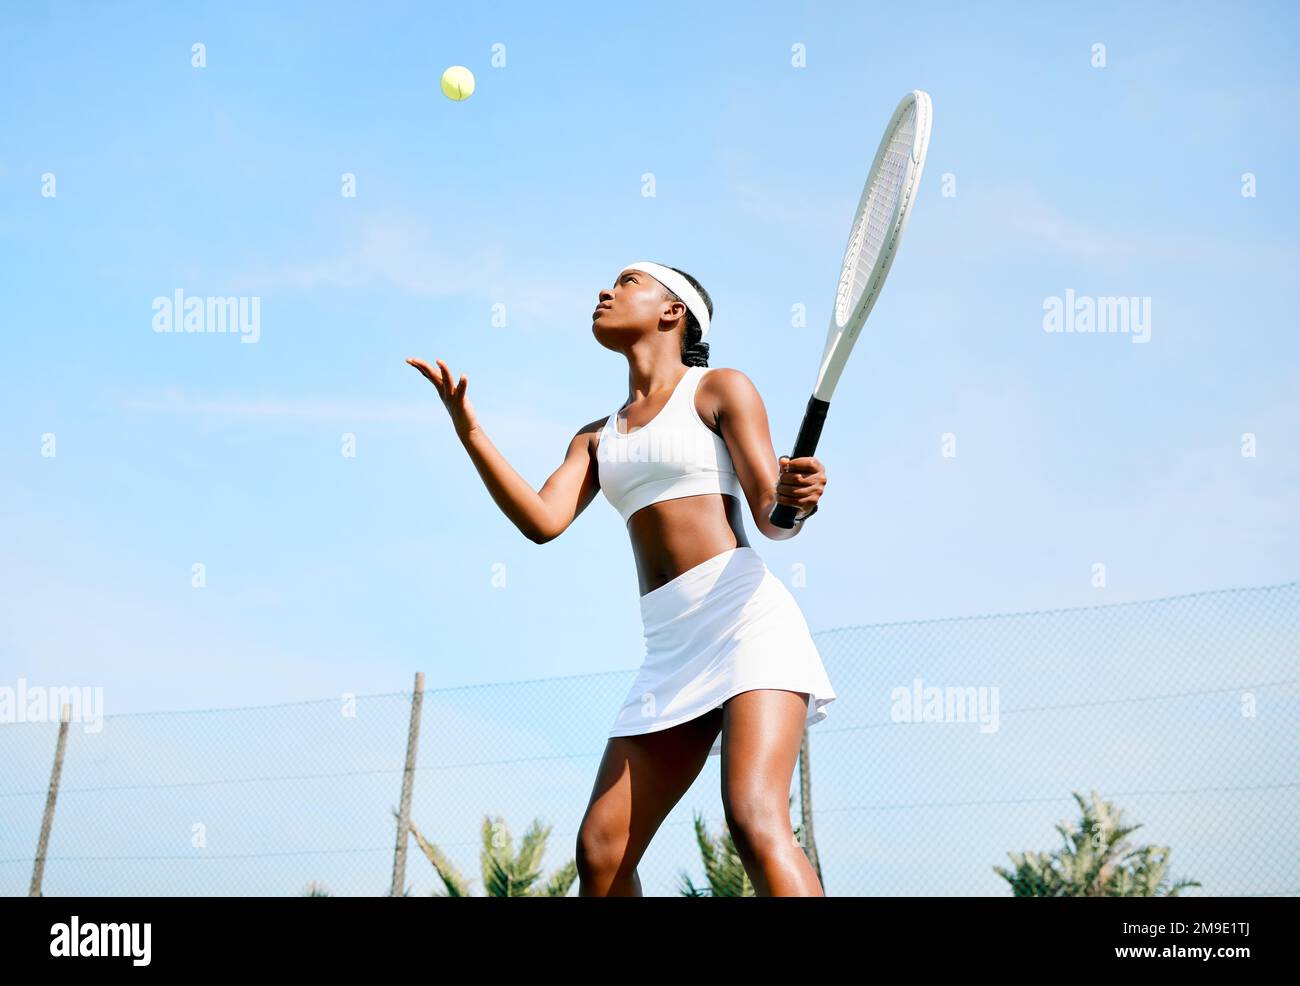 Shes ready to strike it hard. a young woman serving a ball while playing tennis on a court. Stock Photo